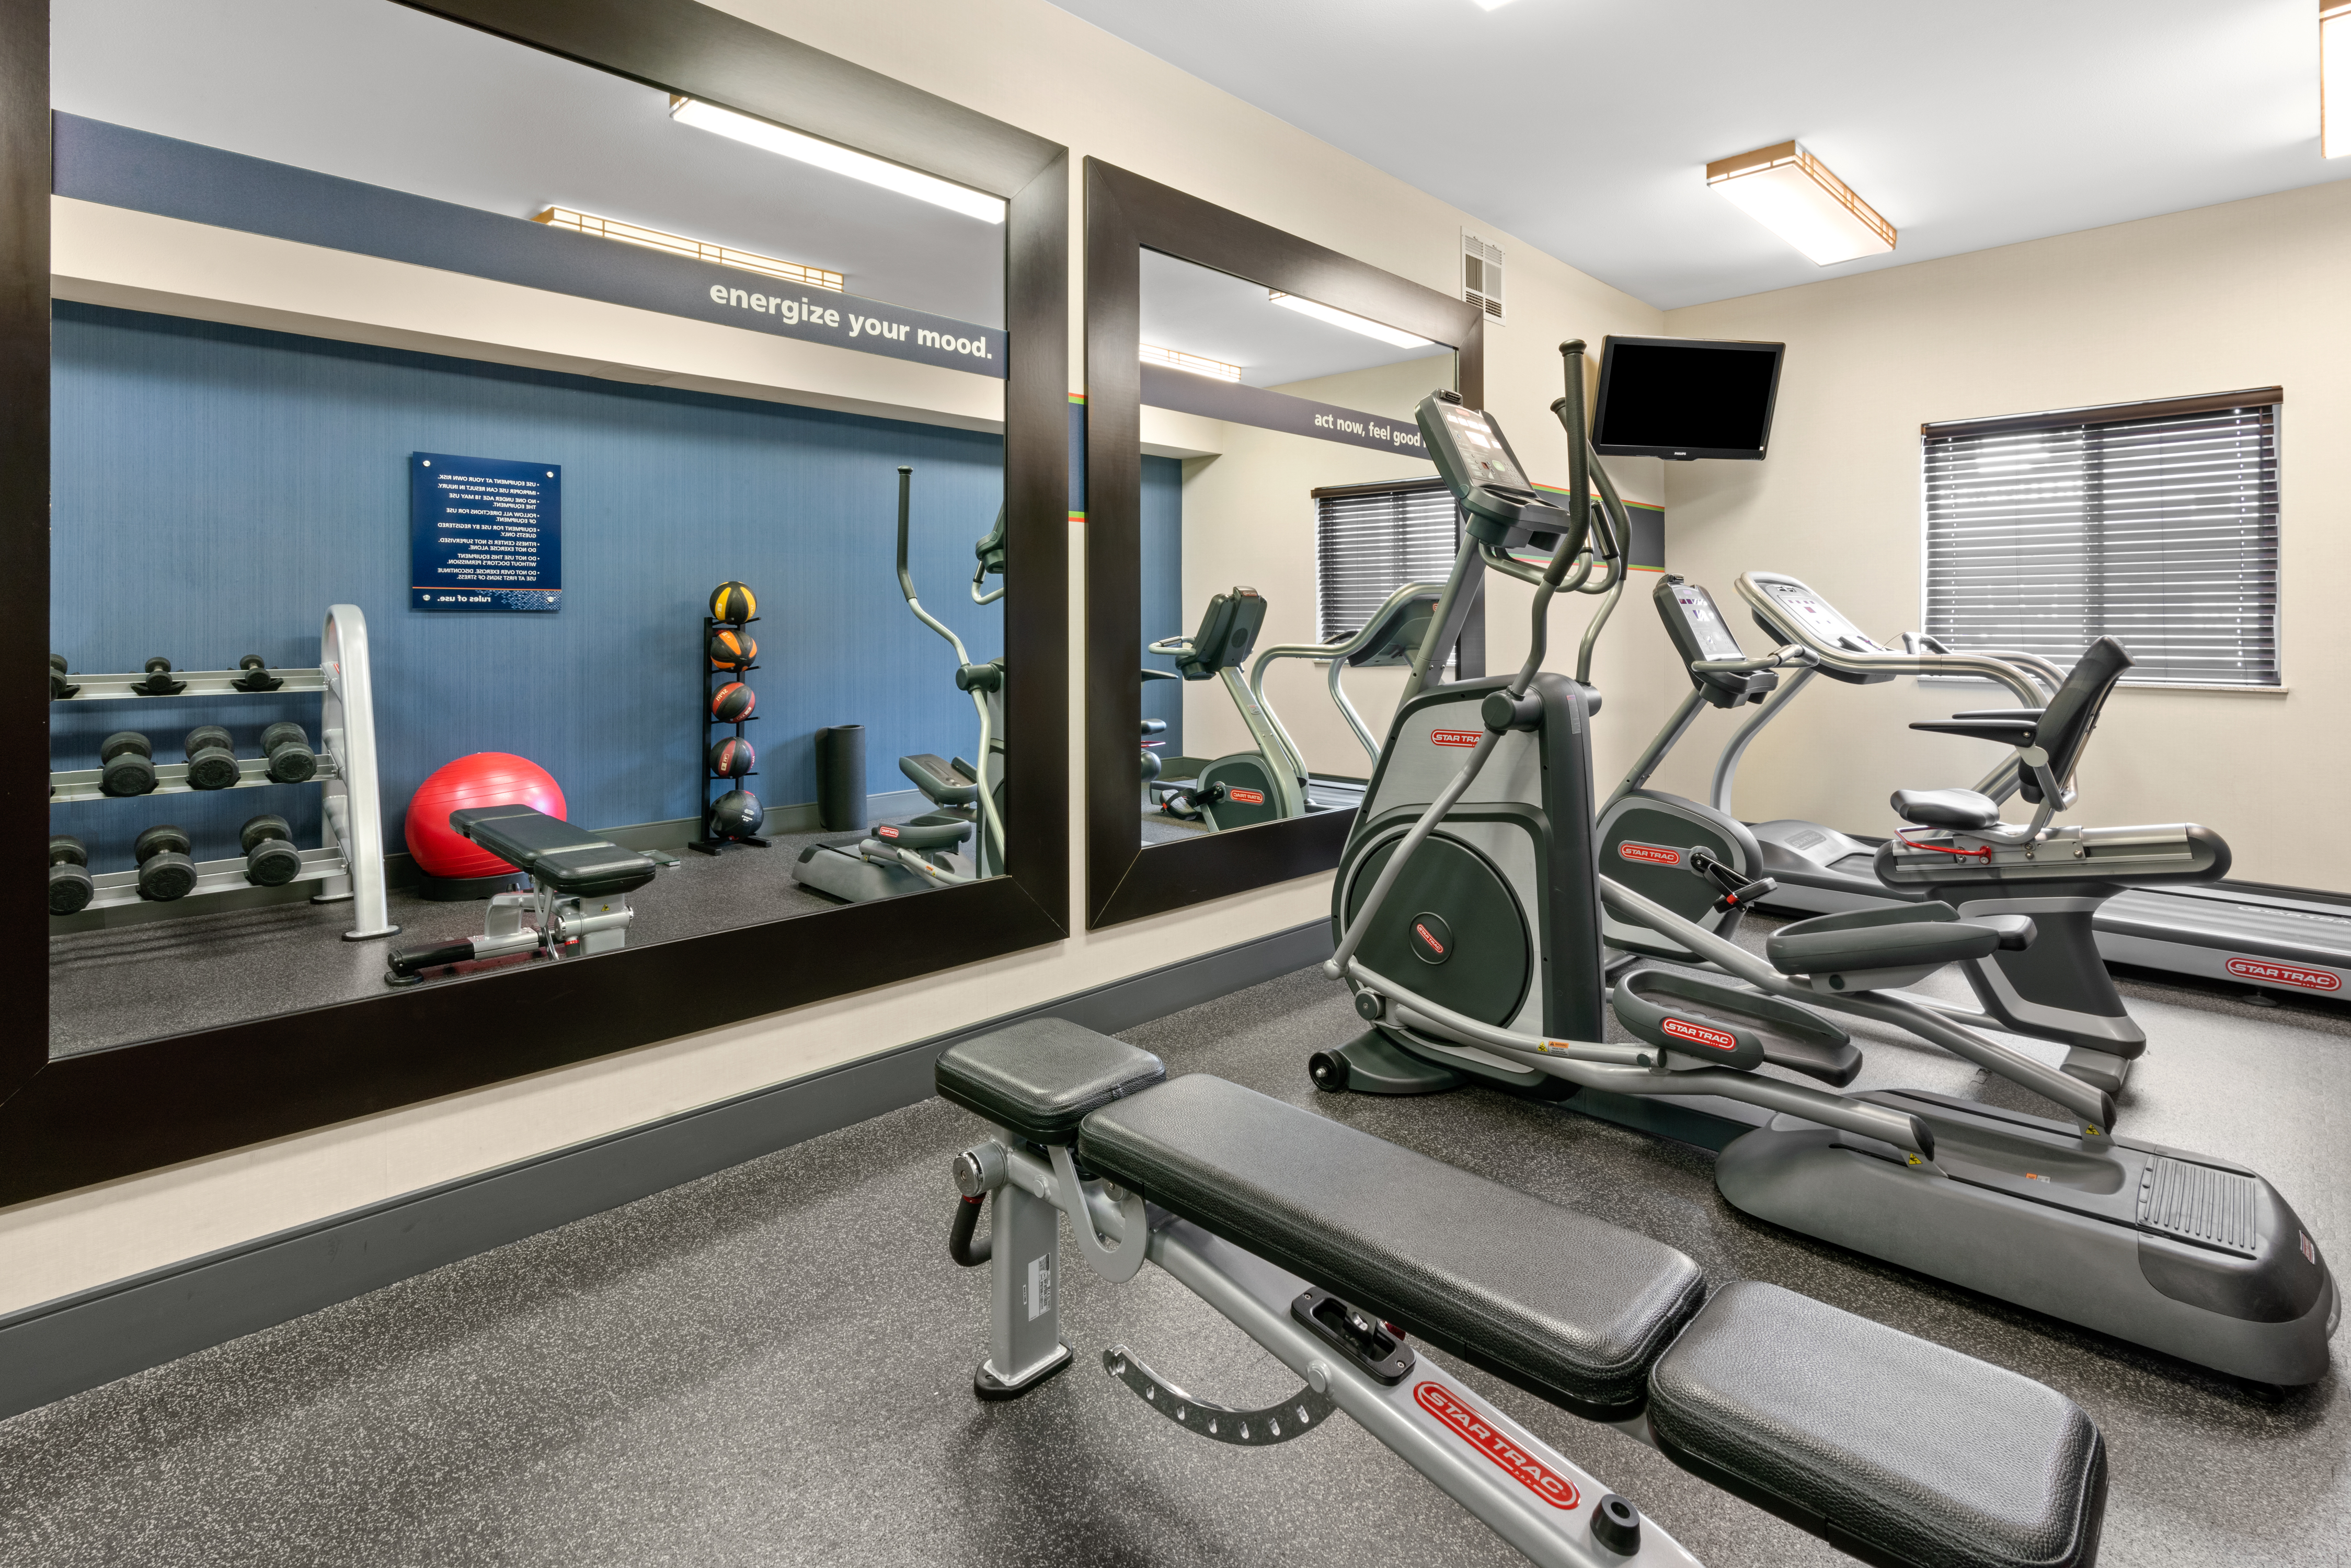 Cardio equipment and hand weights available in our fitness center